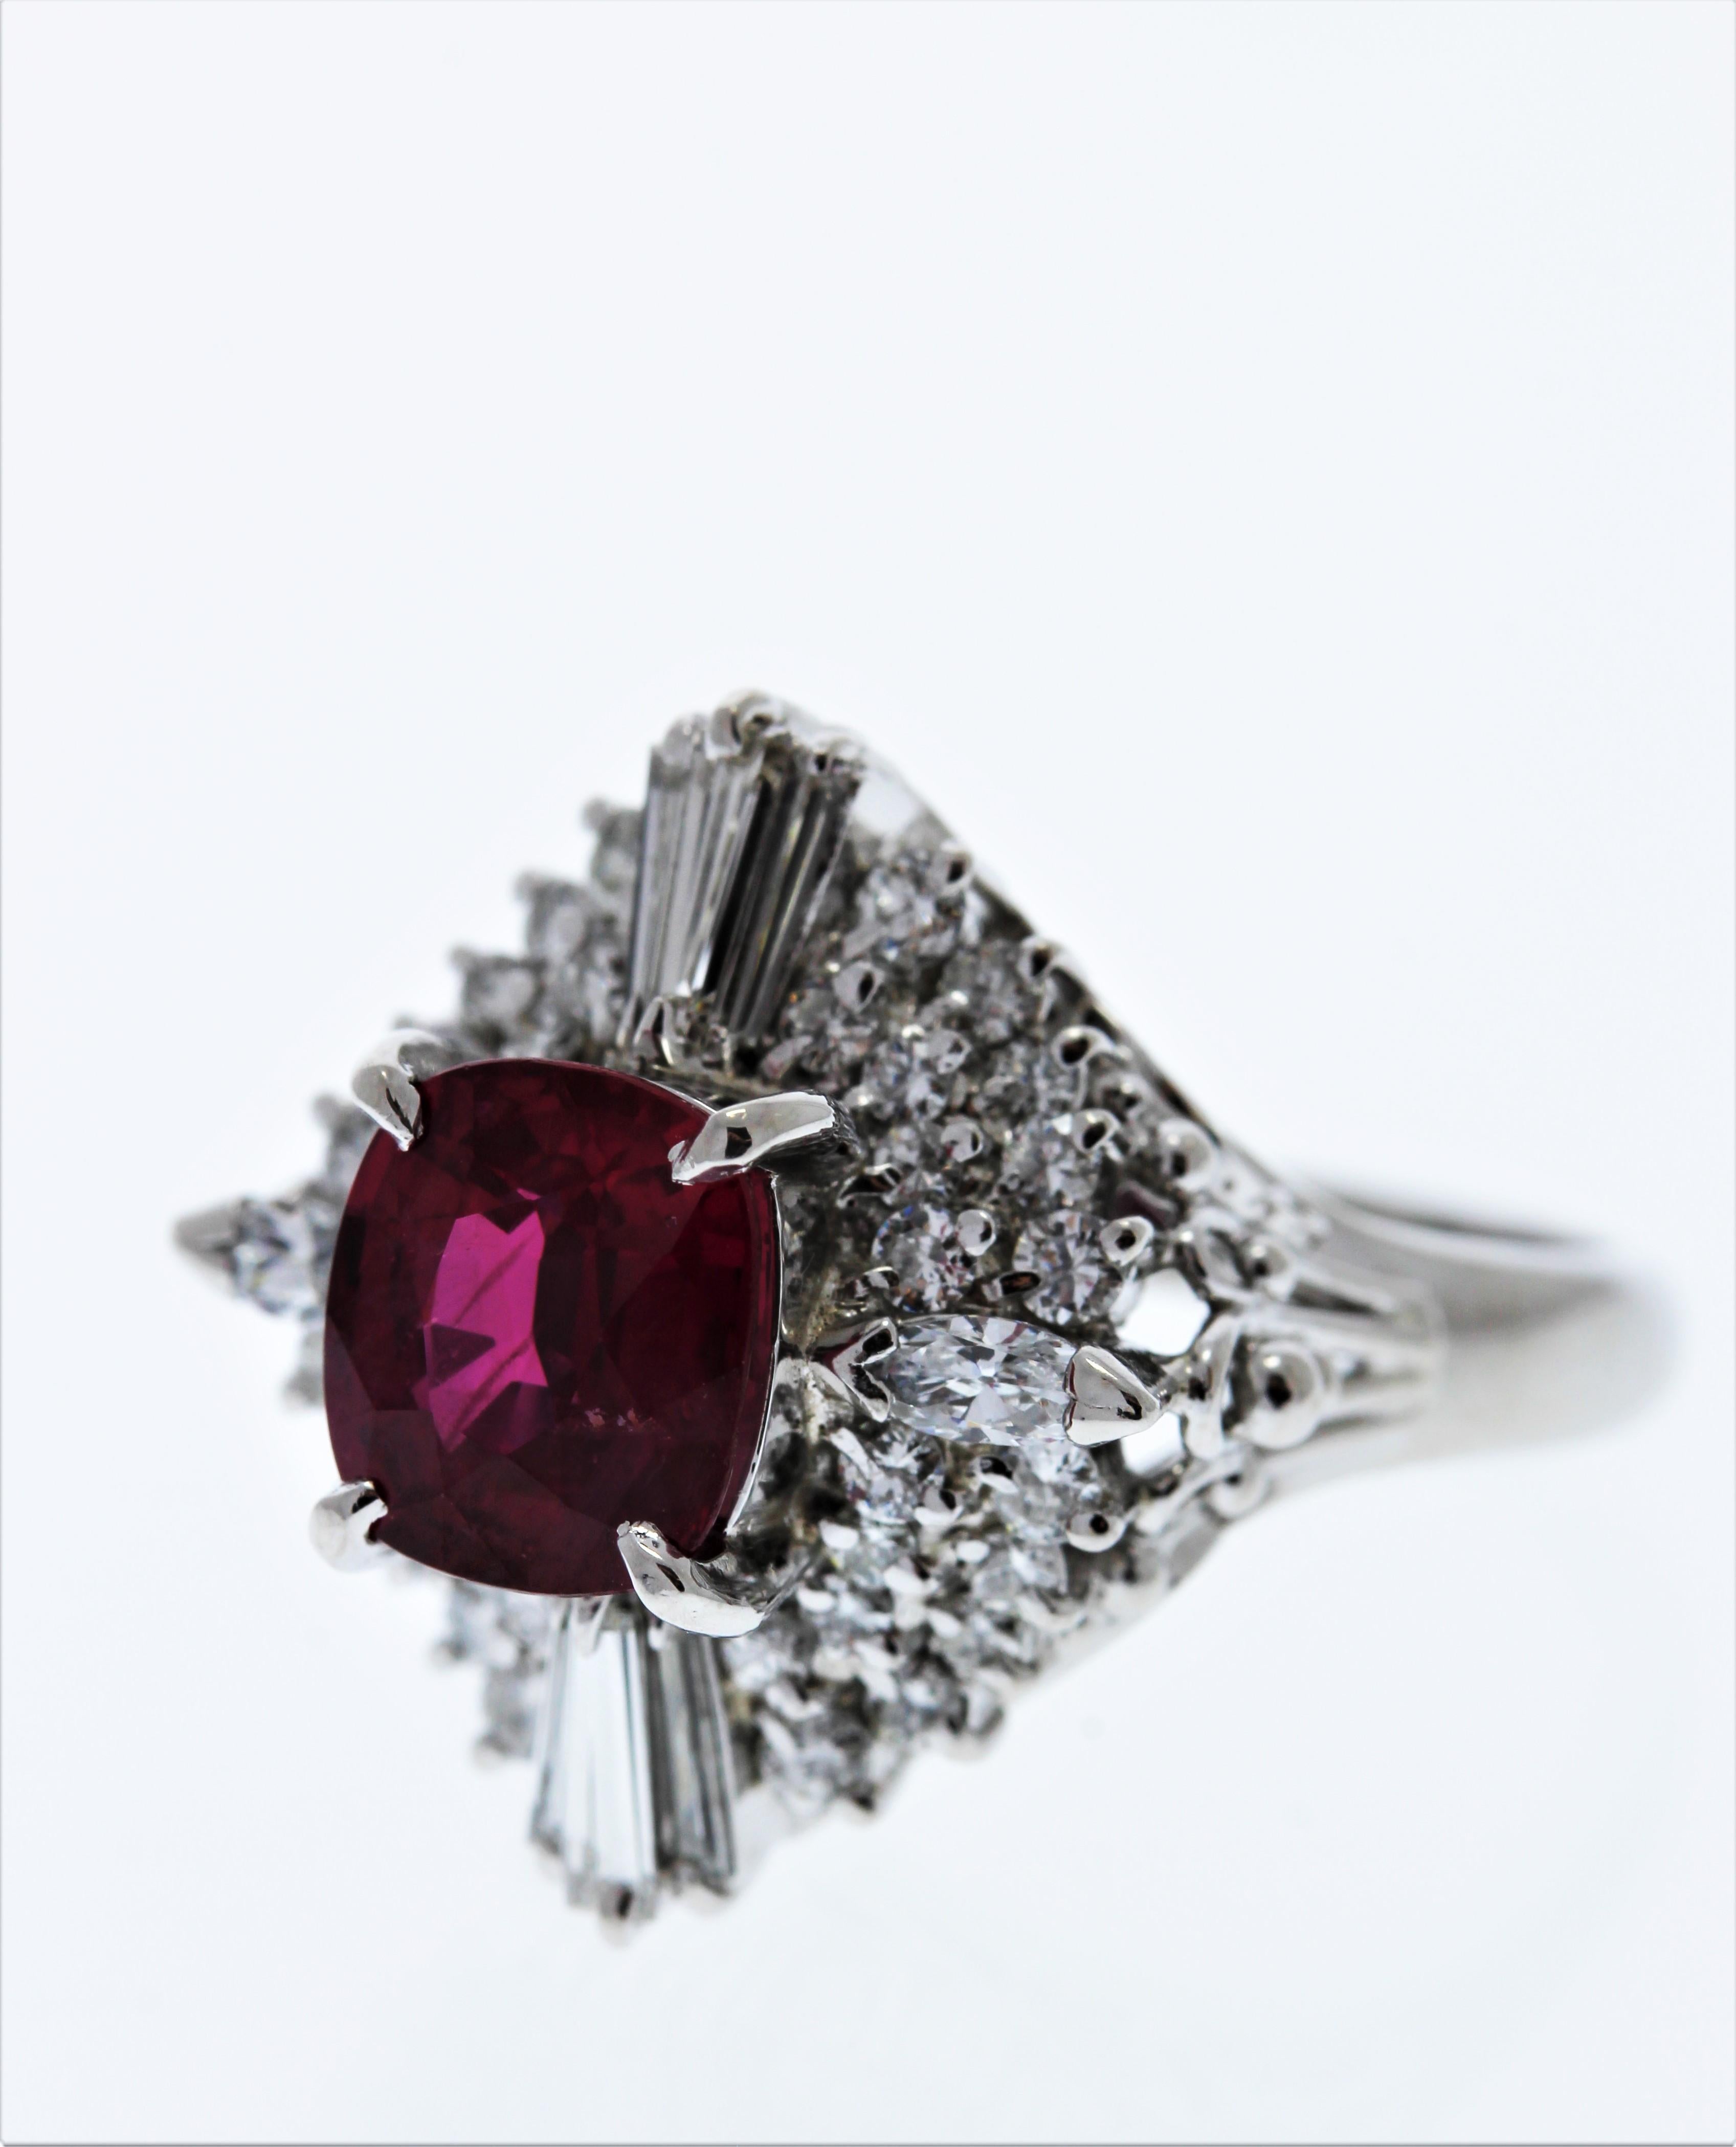 This is a gorgeous oval cut ruby. The gem source is Thailand. Its color is intense red; its transparency and luster are excellent. The shape is alluring; it has a fantastic length to width ratio. Surrounding the ruby is a halo of mixed cut diamonds